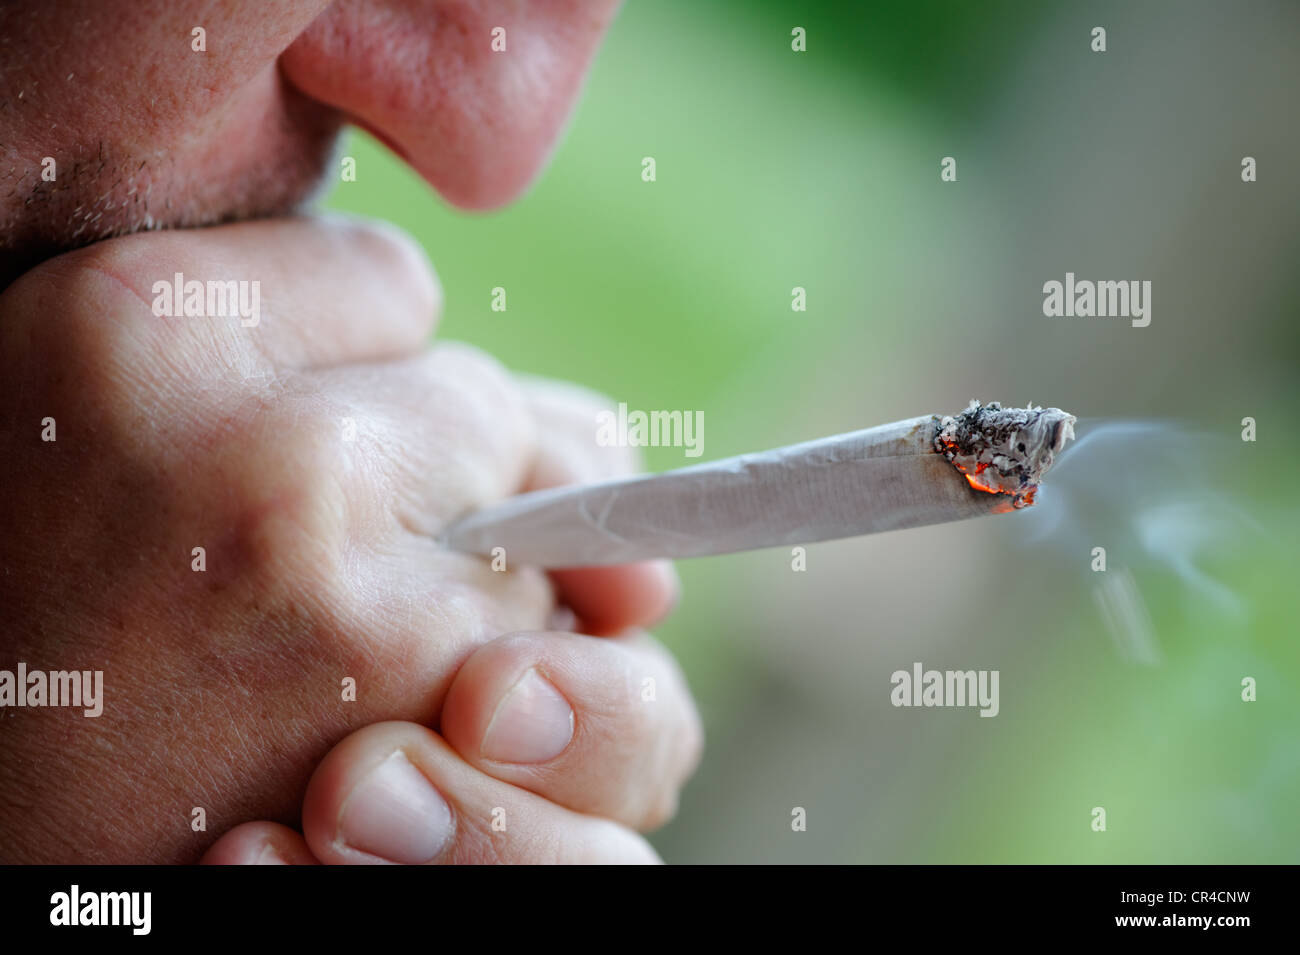 Smoking a joint Stock Photo